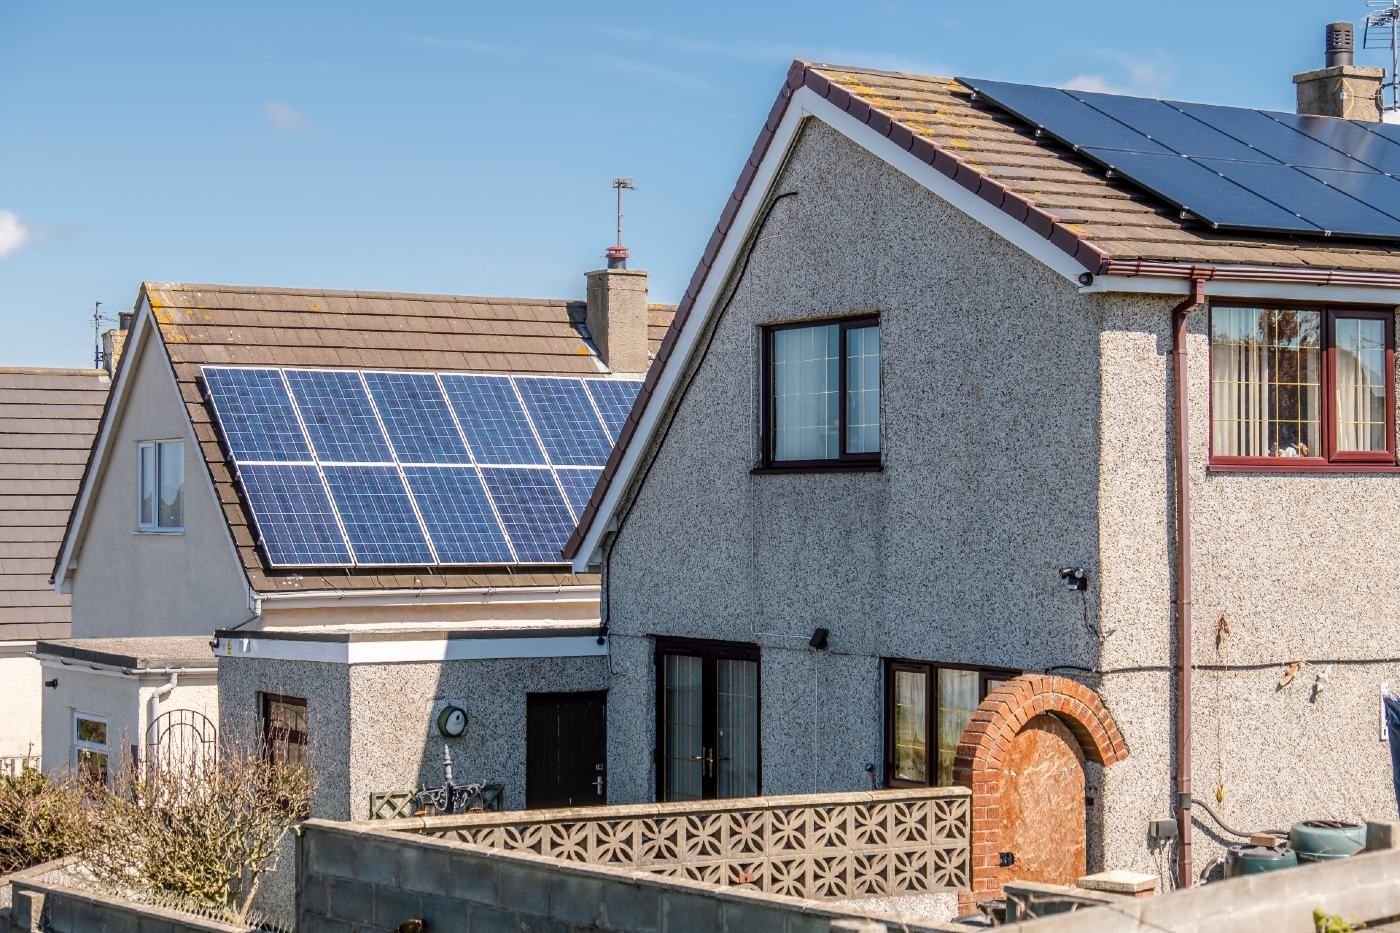 Solar panels on the roofs of homes - Sanyo solar panels